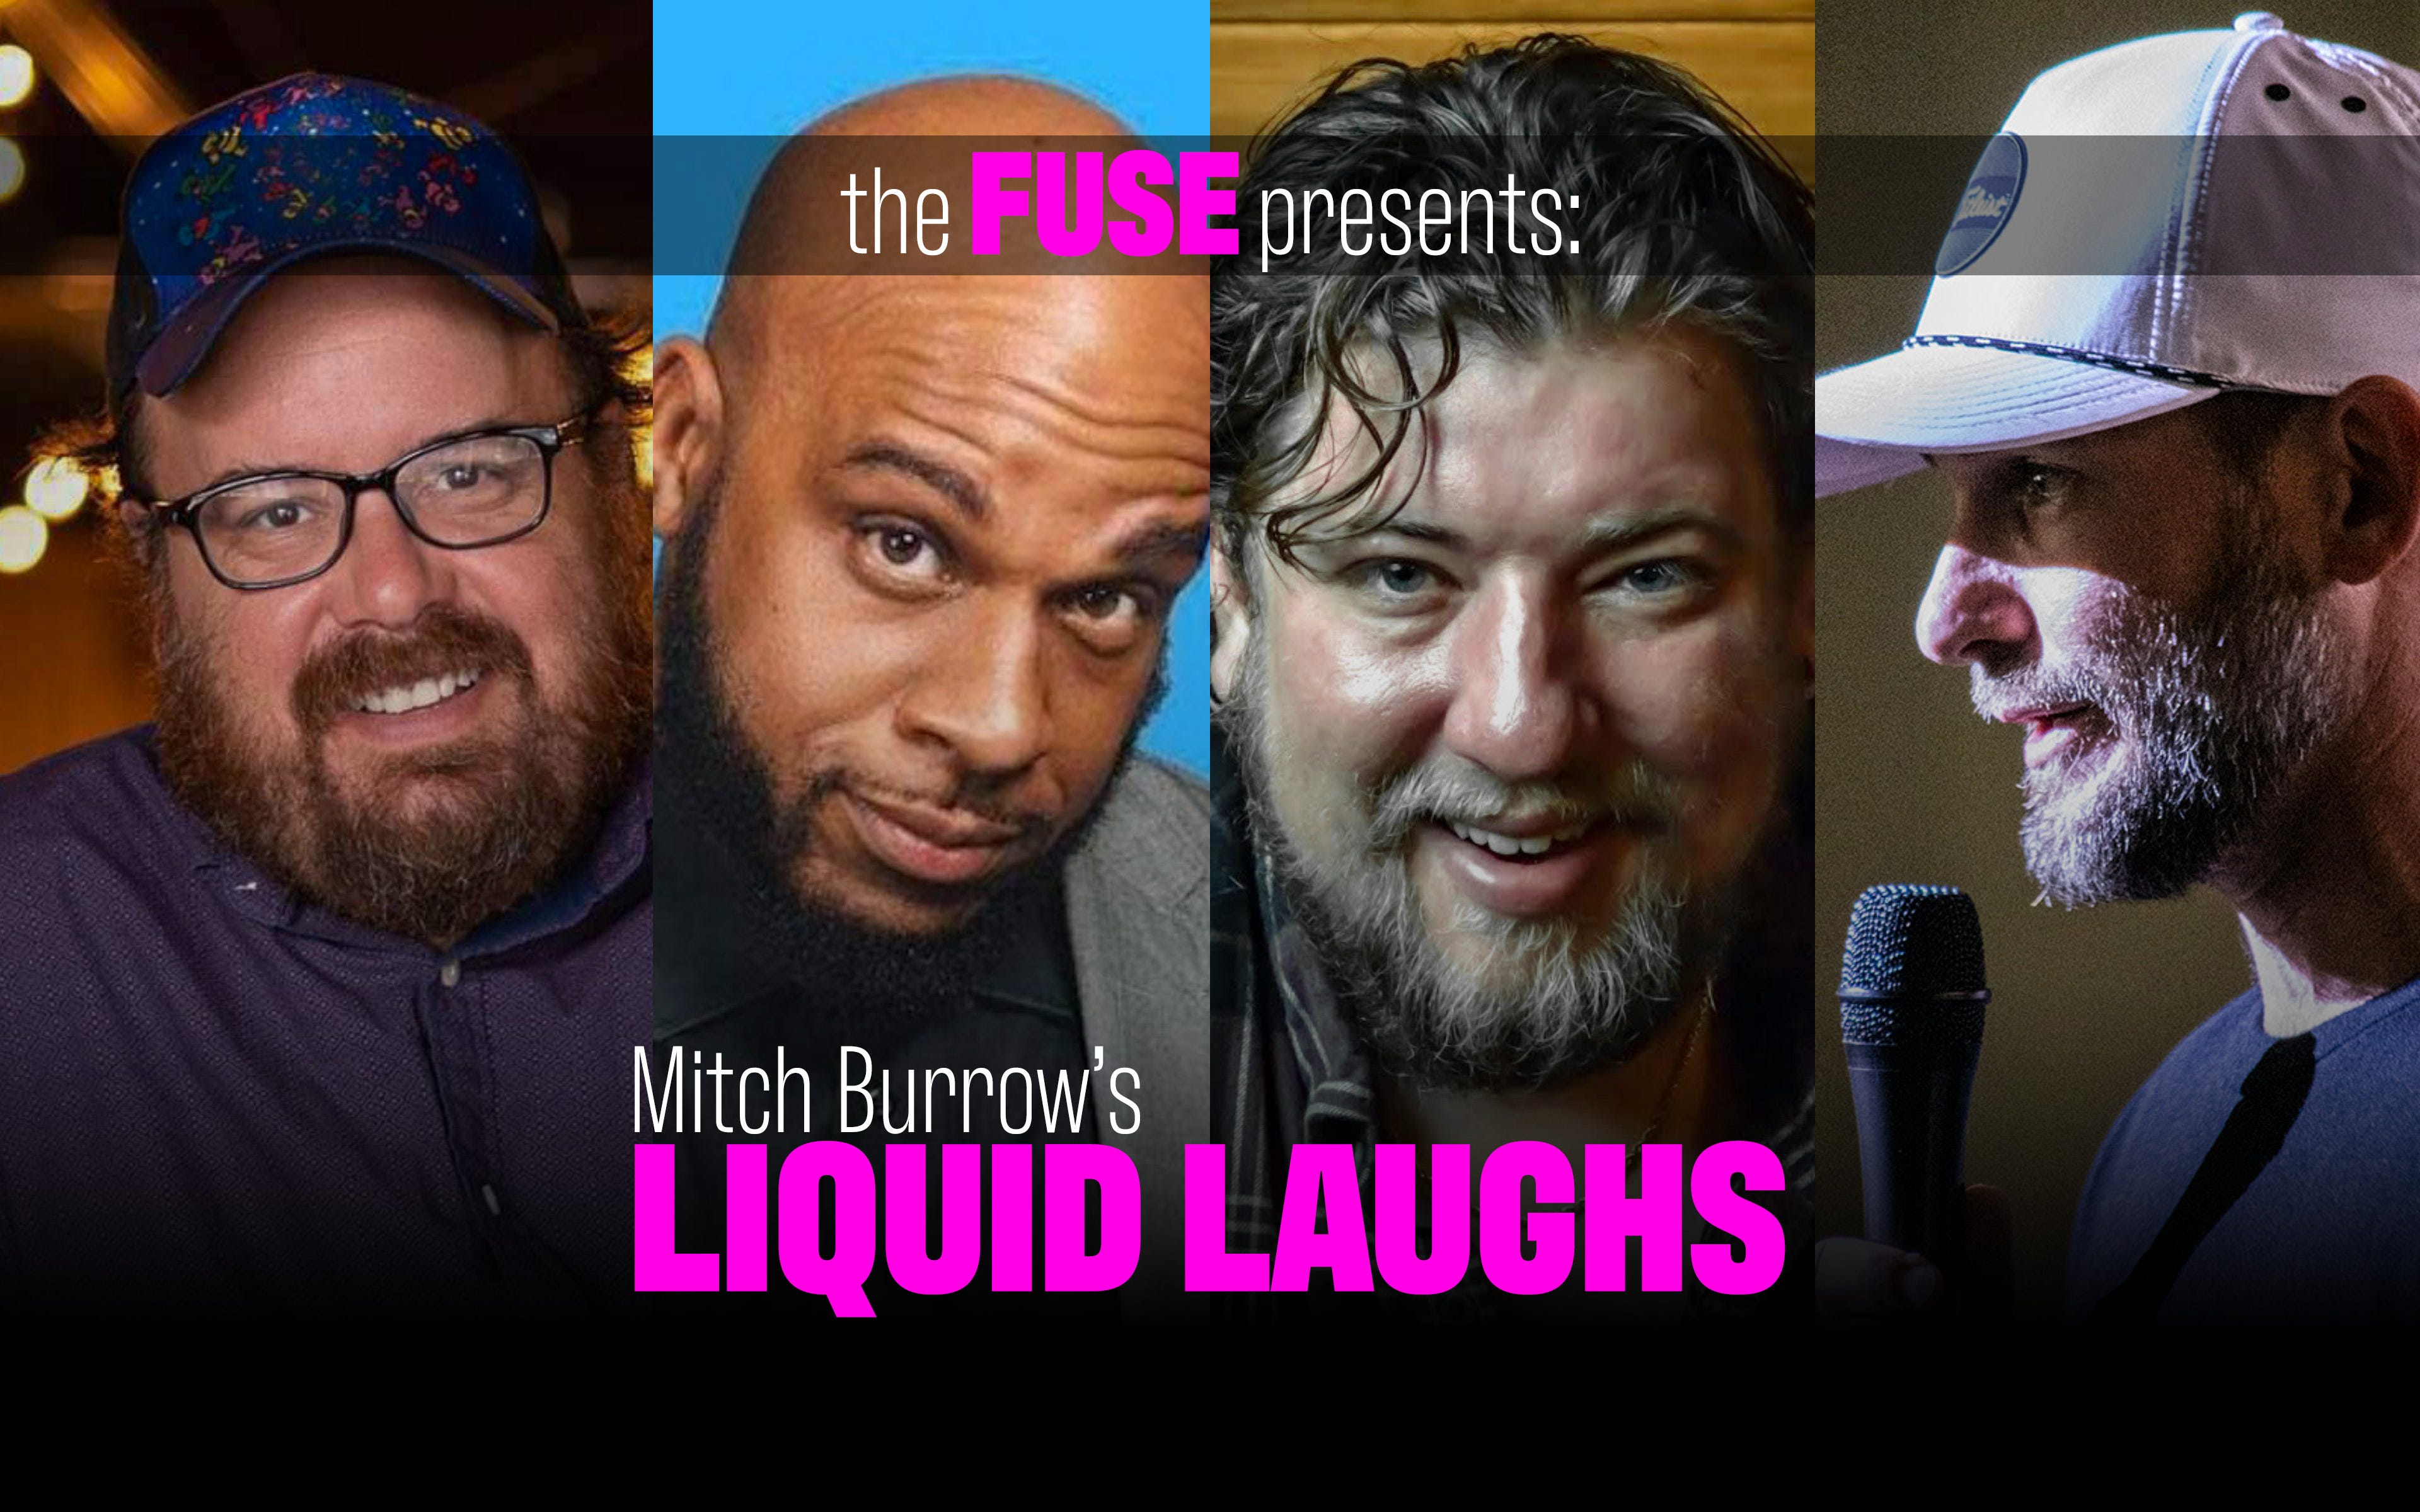 TheFUSE Presents Liquid Laughs 4 by Troy Larson